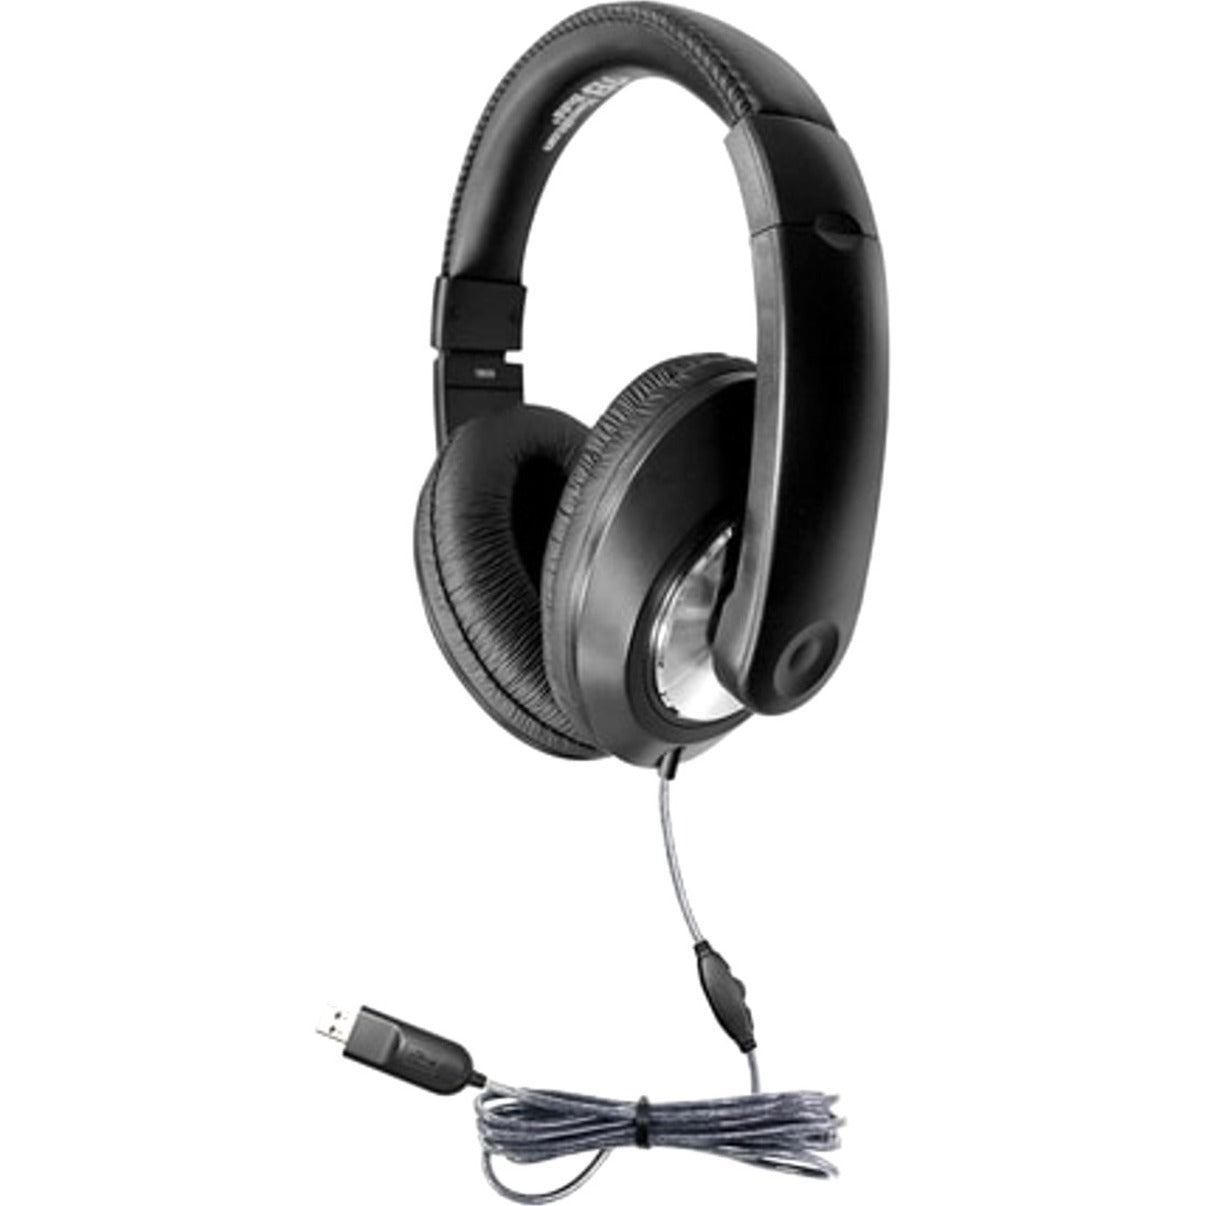 Hamilton Buhl ST1BKU Smart-Trek Deluxe Stereo Headphone With In-Line Volume Control And USB Plug, Comfortable, Durable, Noise Isolation